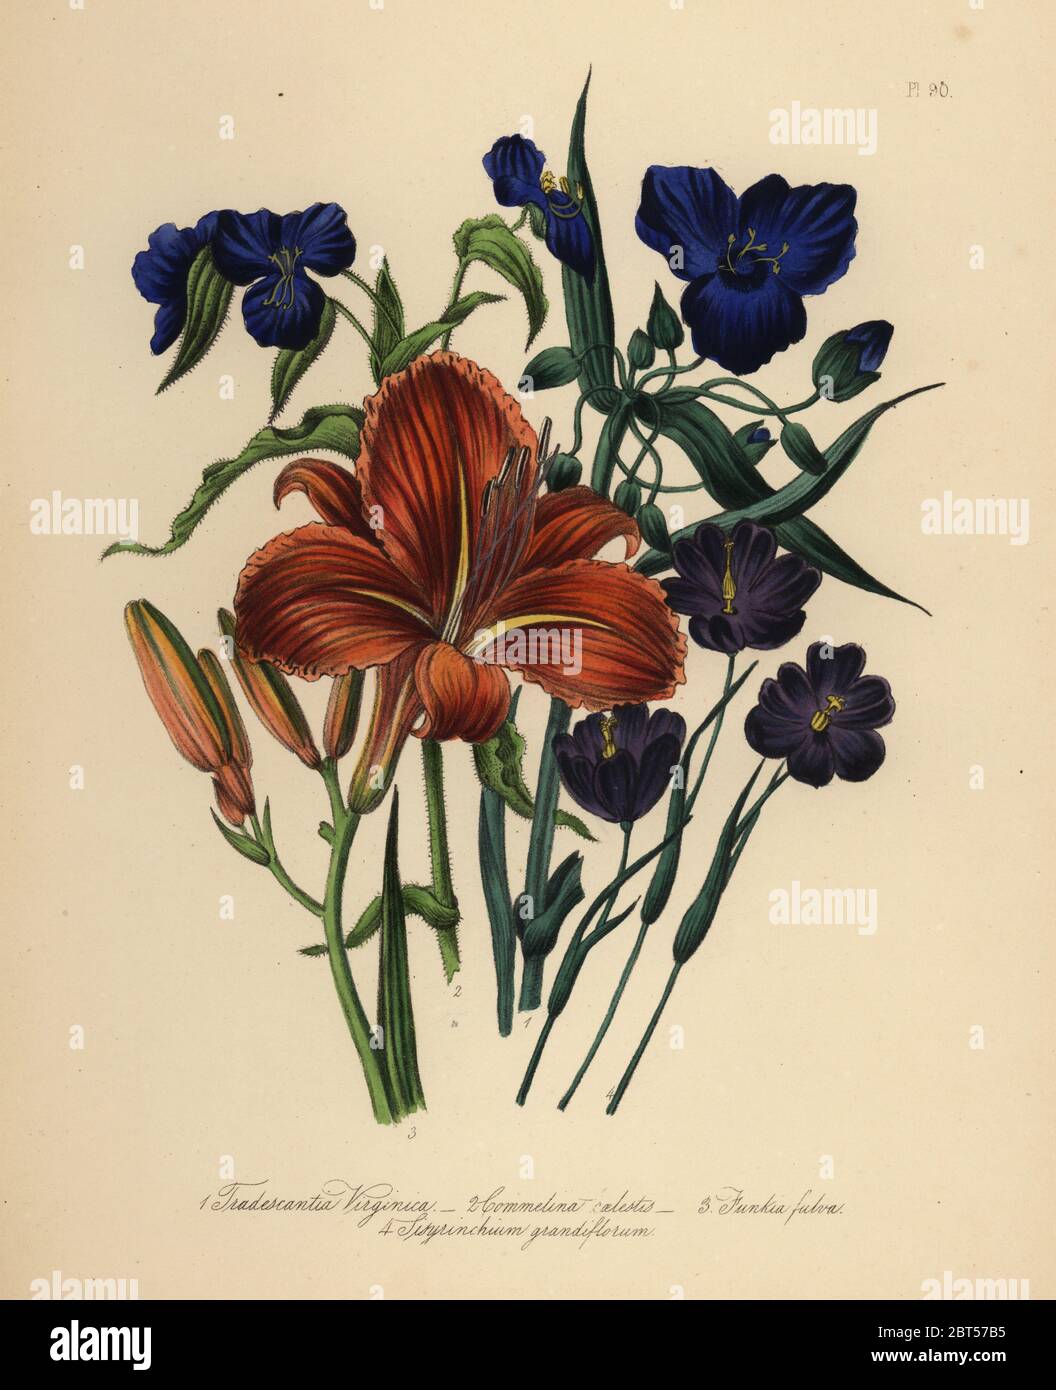 Common spiderwort, Tradescantia virginica, sky-blue commelin, Commelina caelestis, copper-coloured day lily, Funkia fulva, and large-flowered sisyrinchium, Sisyrinchium grandiflorum. Handfinished chromolithograph by Henry Noel Humphreys after an illustration by Jane Loudon from Mrs. Jane Loudon's Ladies Flower Garden of Ornamental Perennials, William S. Orr, London, 1849. Stock Photo